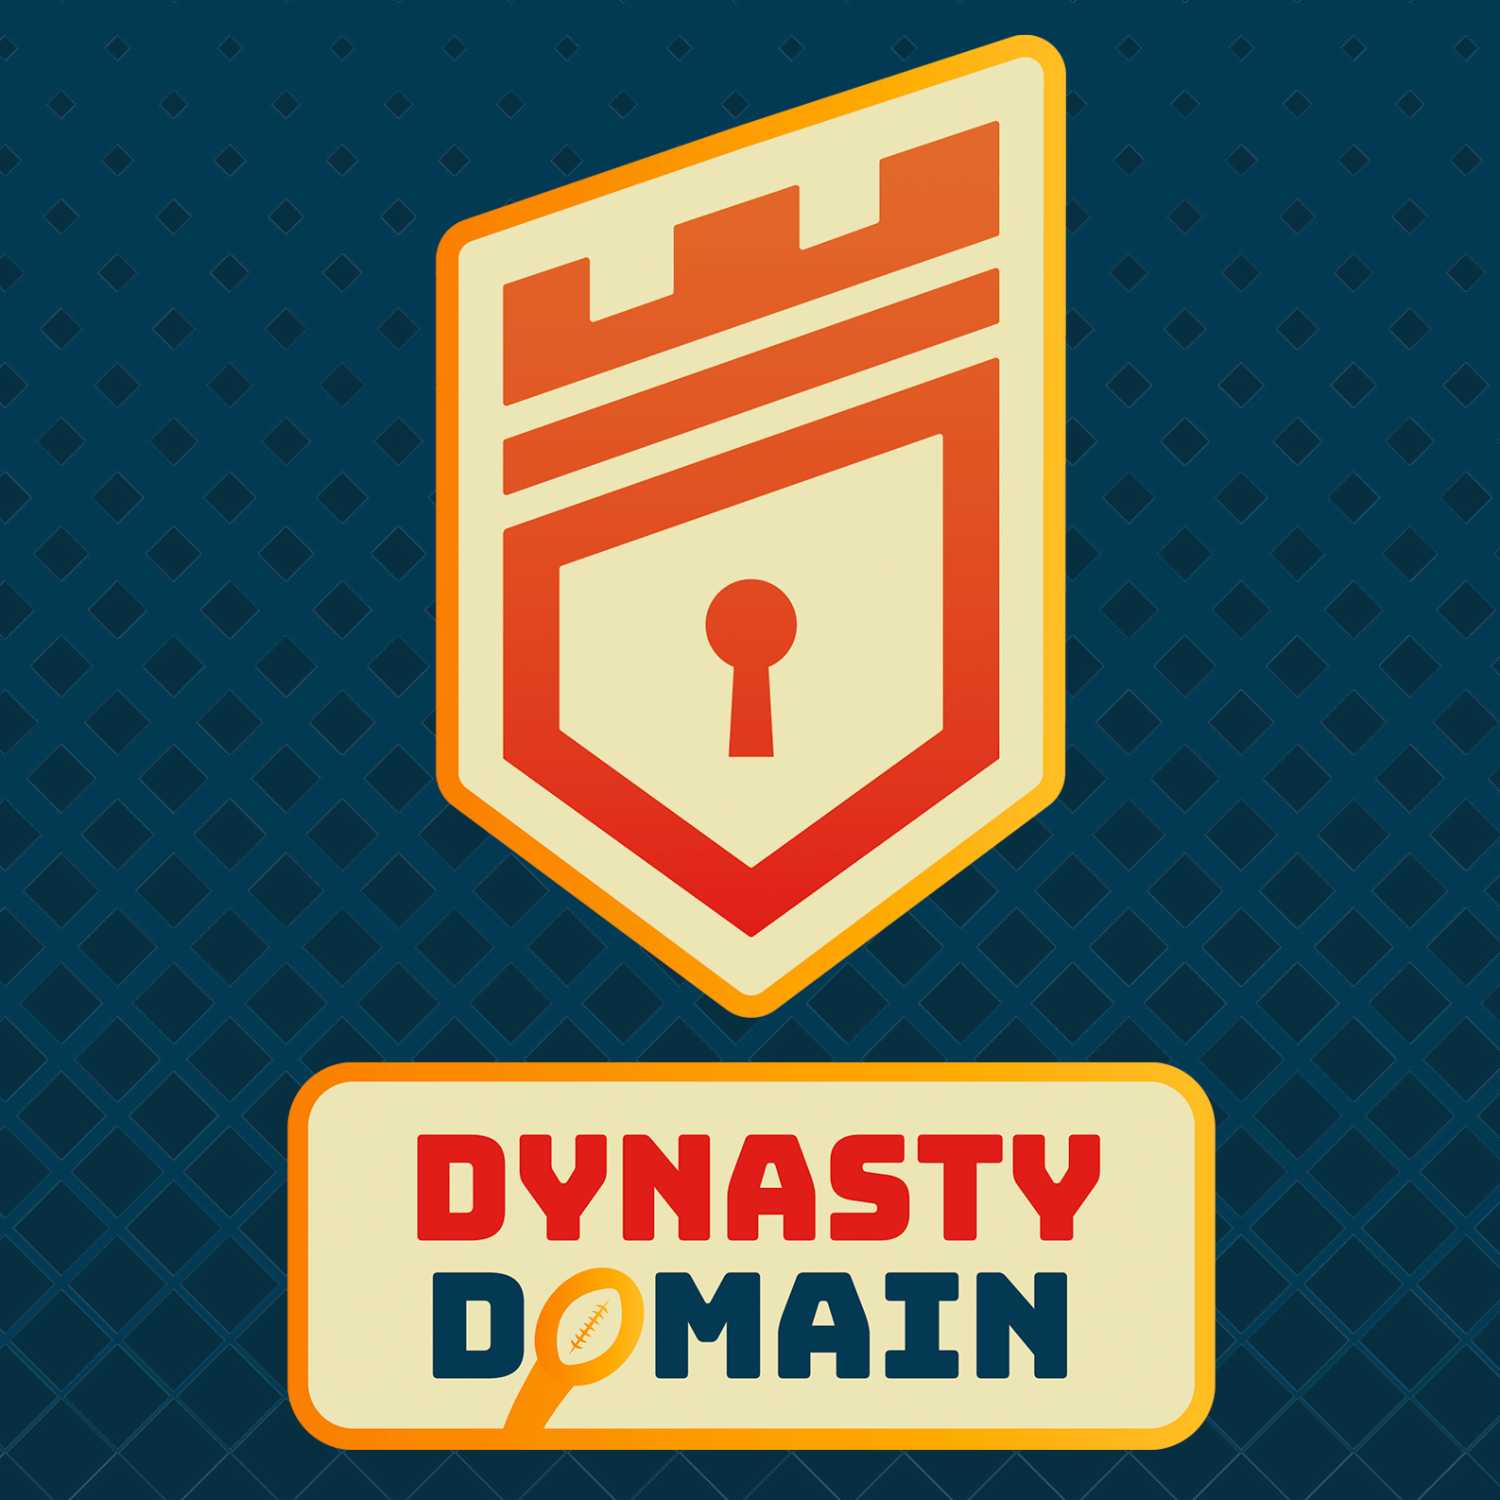 Dynasty Domain: How To Make Smart Contending Dynasty Moves (Target These Players)